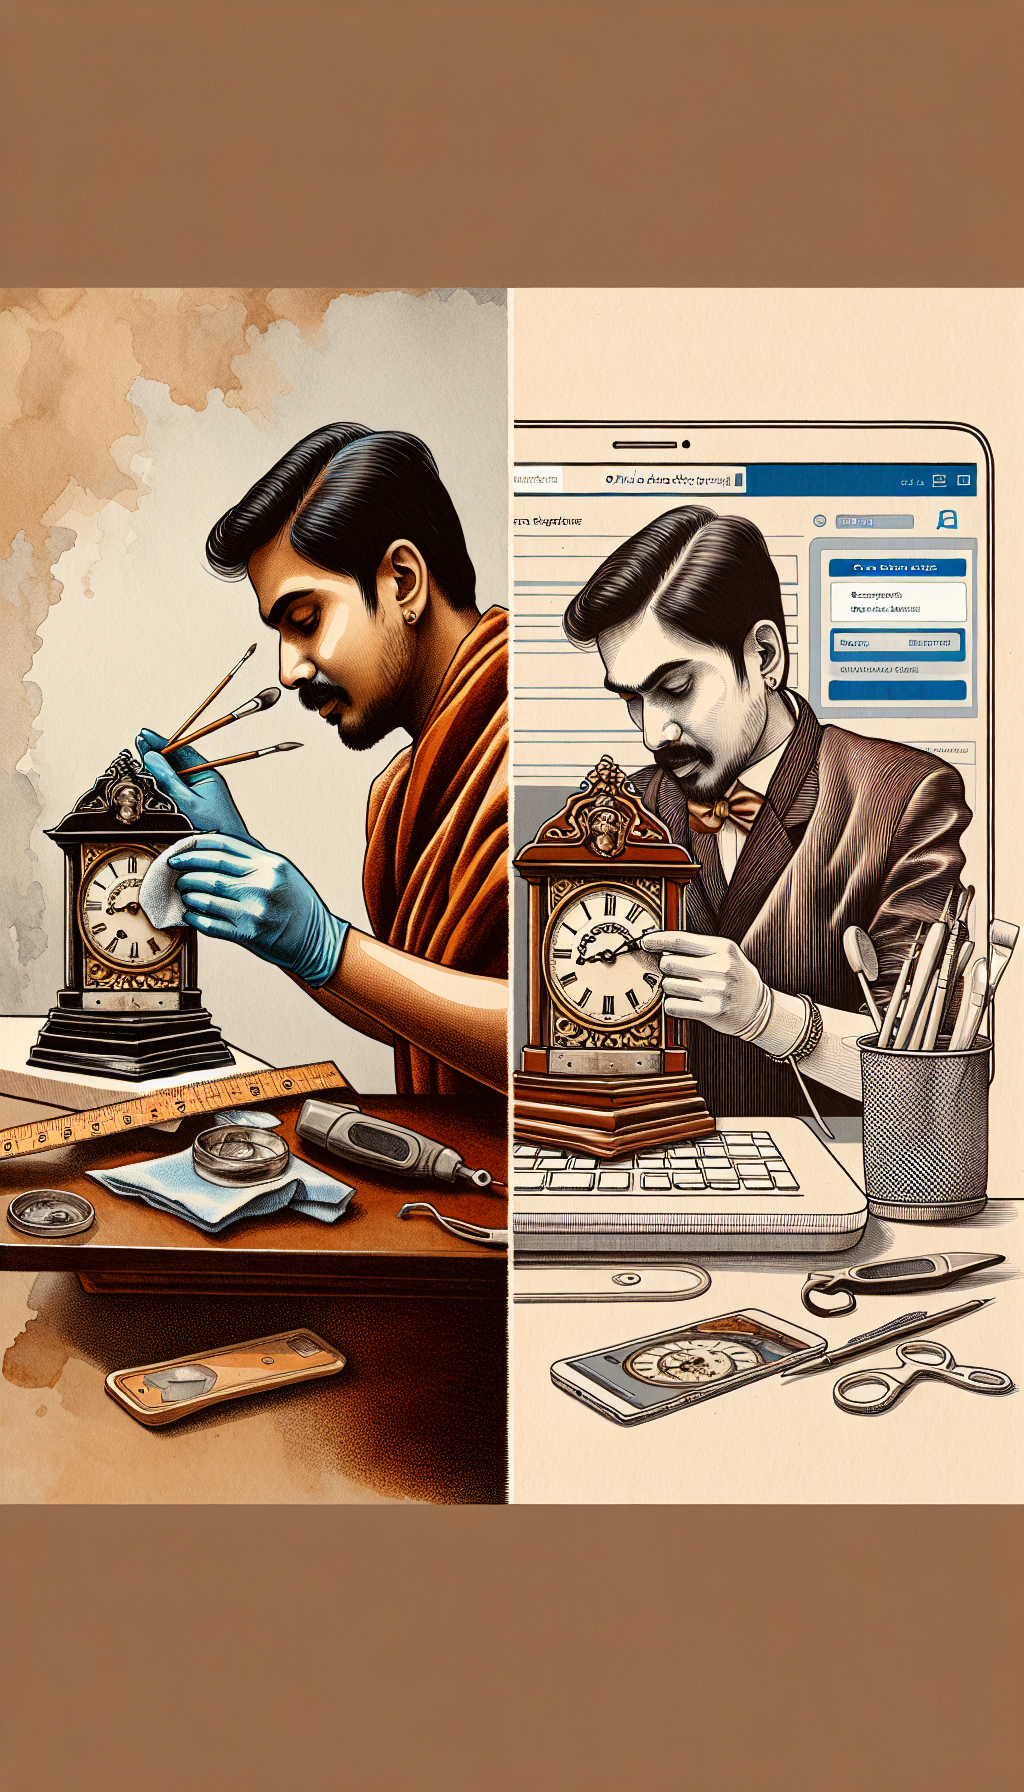 A split-screen illustration: on one side, a person carefully cleans a vintage clock with a soft cloth; on the other, they're photographing it beside a ruler for scale, with a computer screen in the background displaying an "Online Antique Appraisal" form. The contrasting styles - watercolor for cleaning, digital line art for photographing - emphasize the merging of traditional care and modern technology.